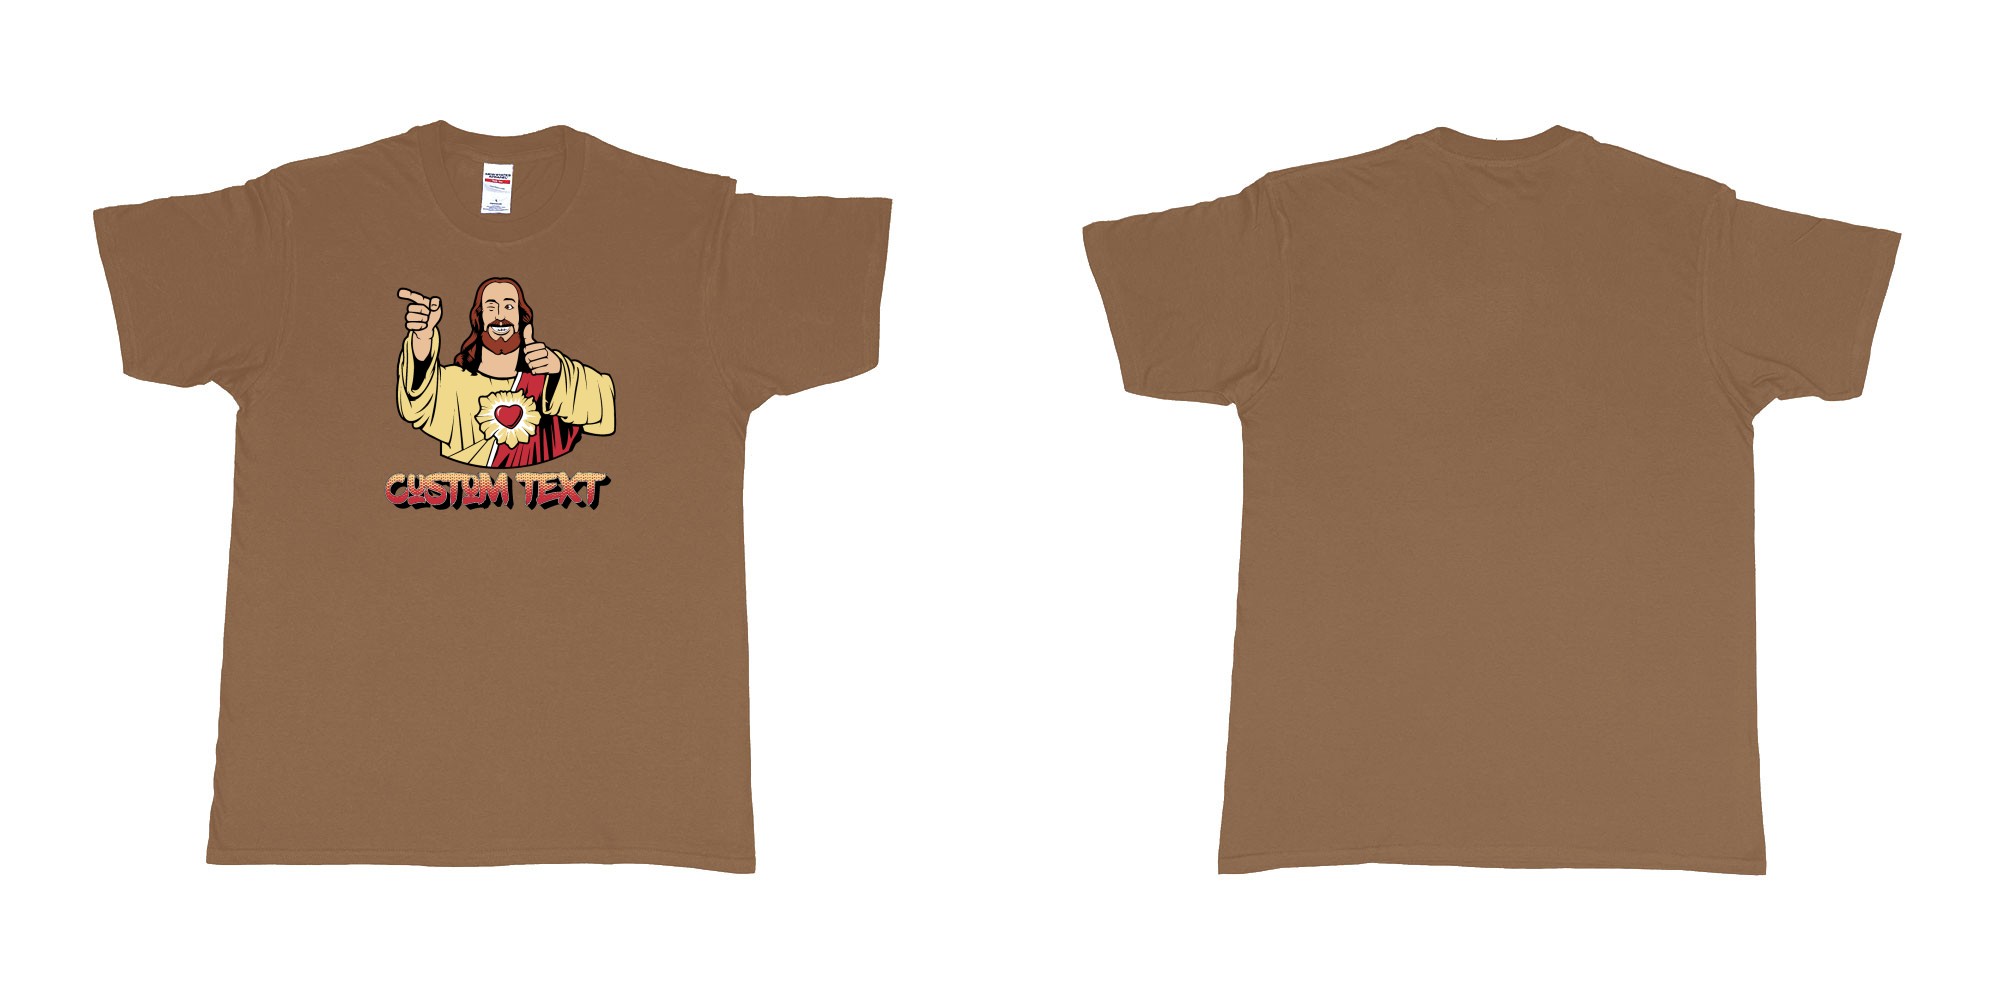 Custom tshirt design buddy christ custom text in fabric color chestnut choice your own text made in Bali by The Pirate Way